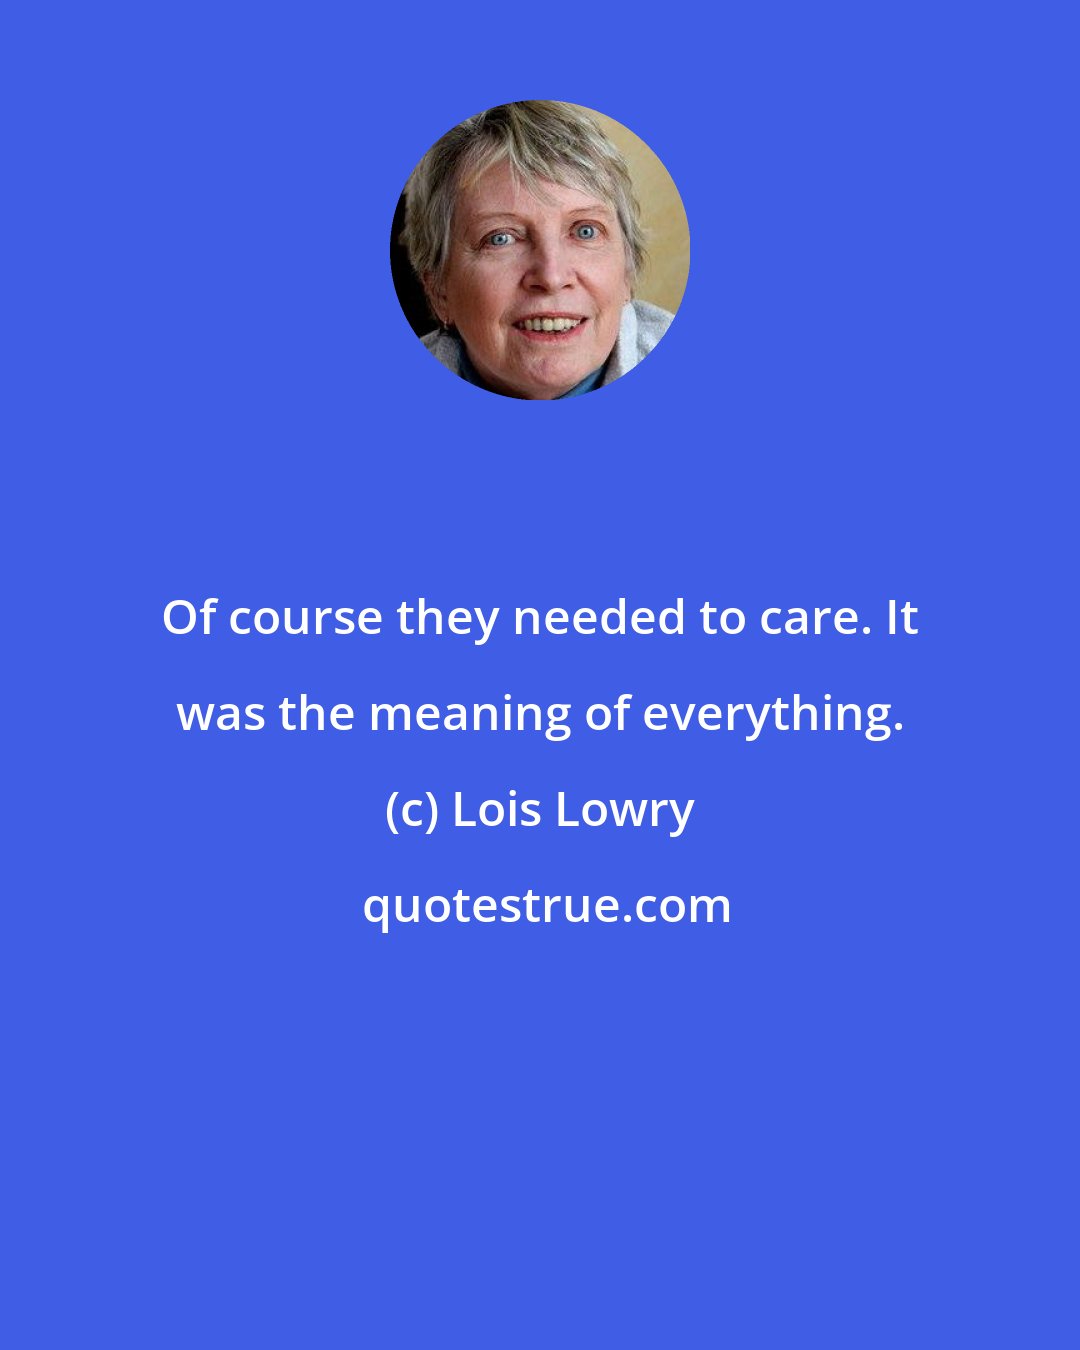 Lois Lowry: Of course they needed to care. It was the meaning of everything.